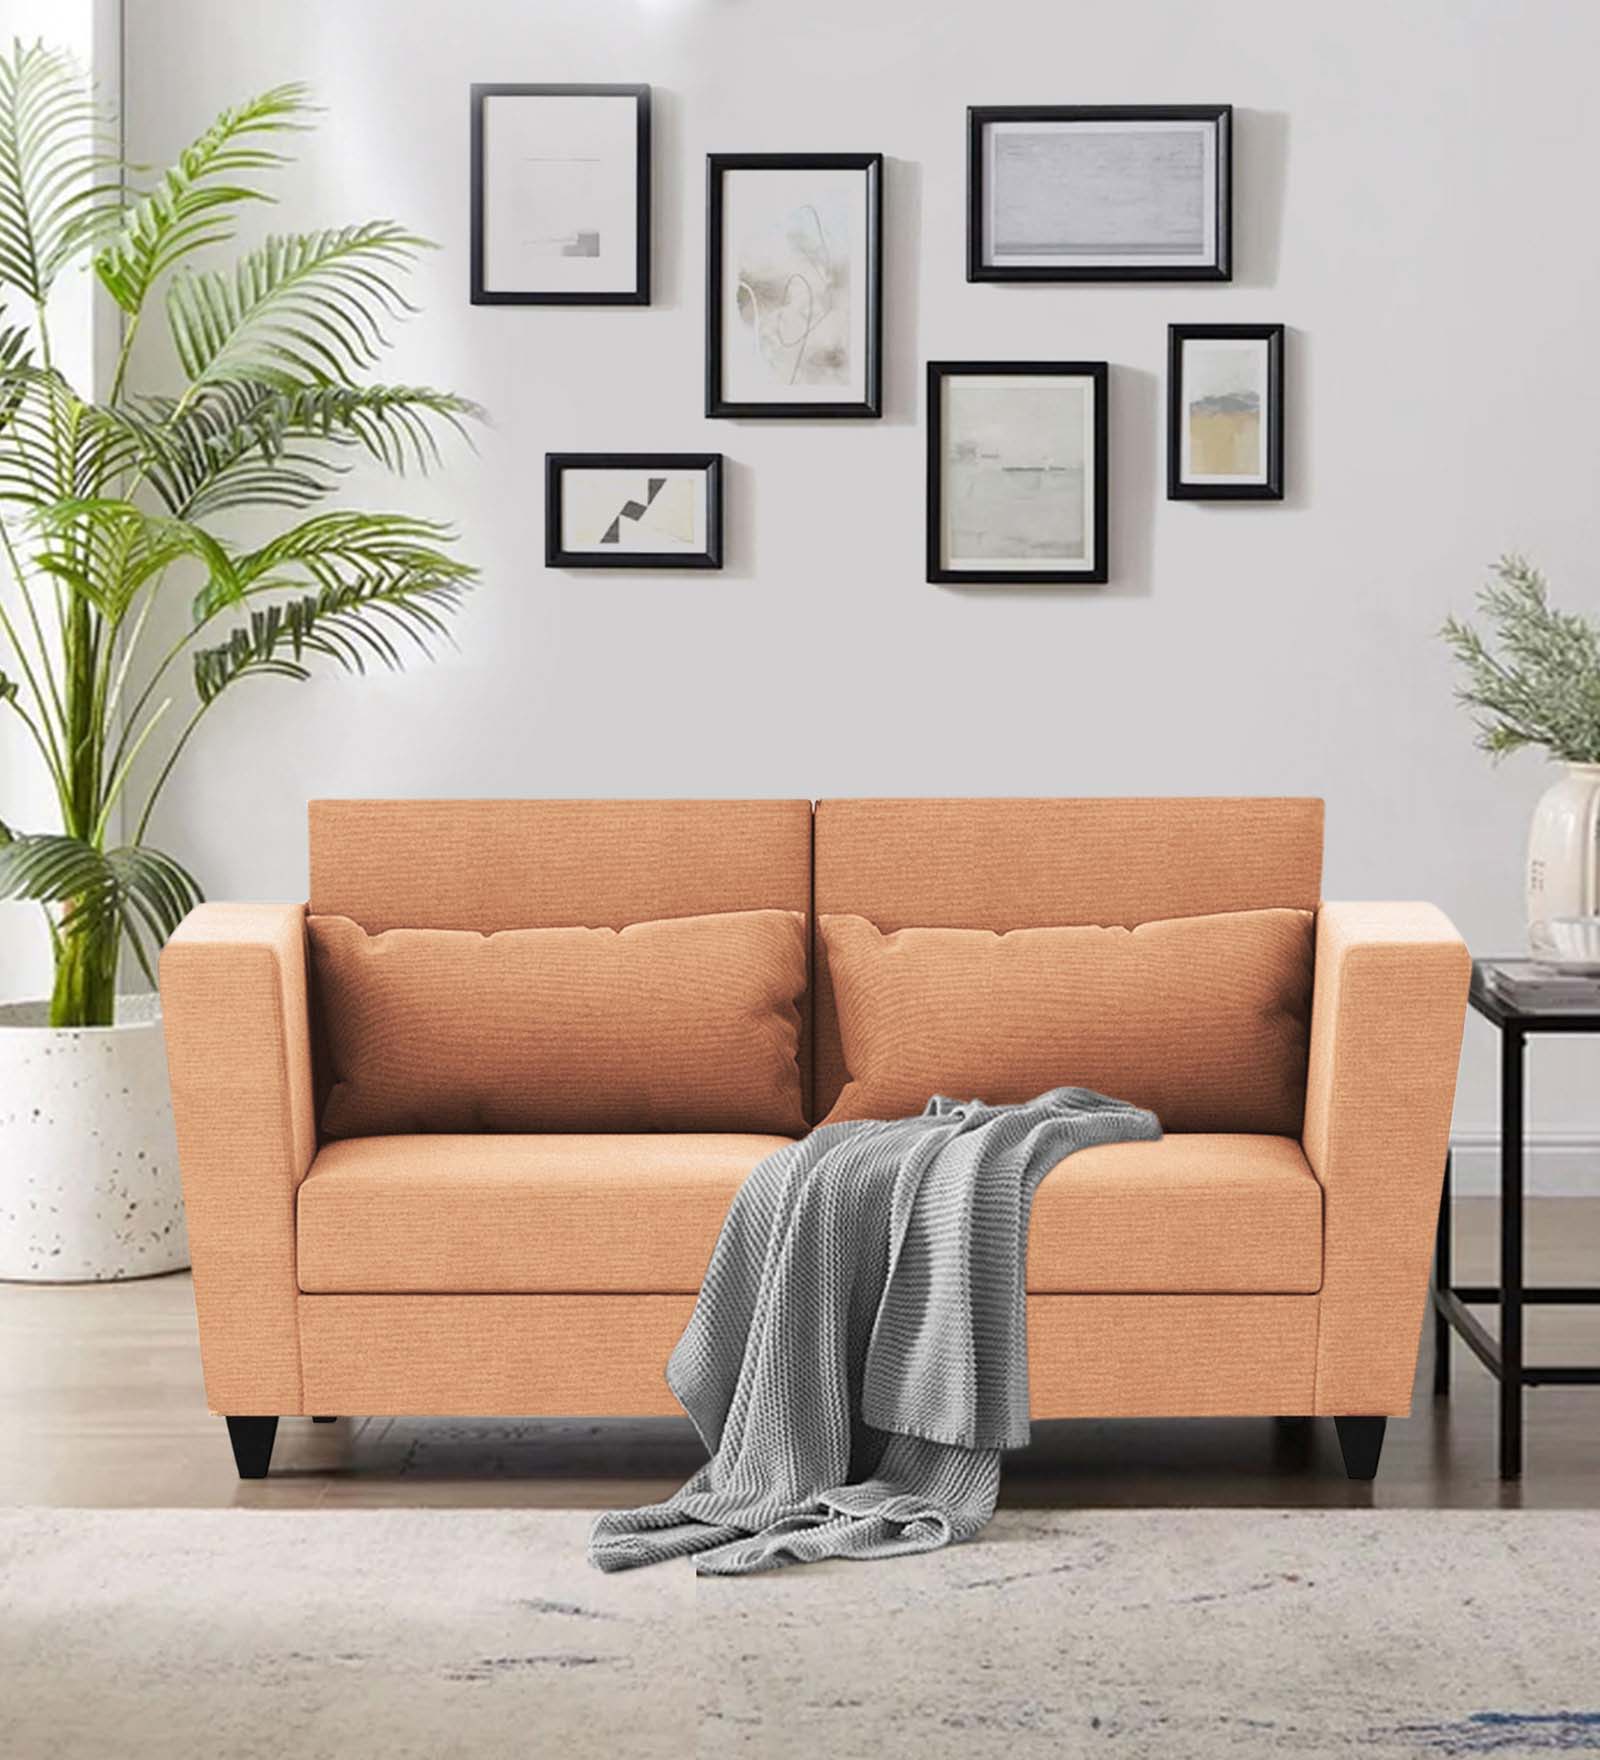 Tokyo Fabric 2 Seater Sofa in Cosmic Beige Colour